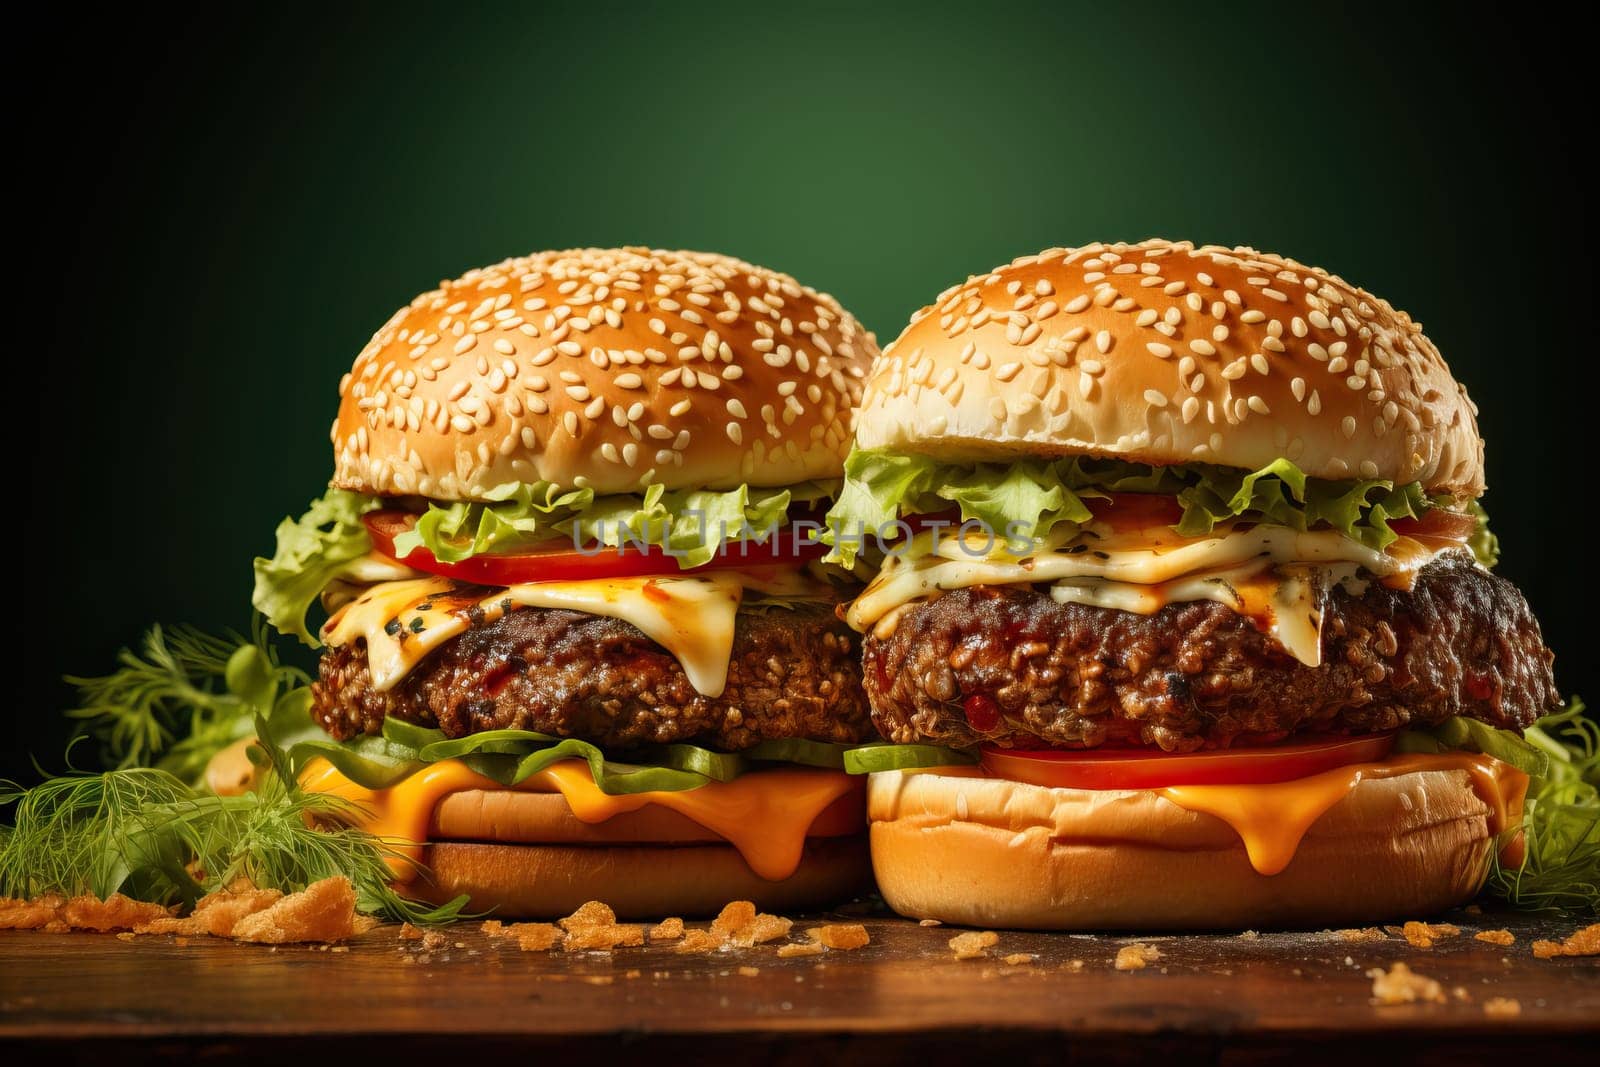 Two burgers on a tray with a black and green background, hearty fast food.